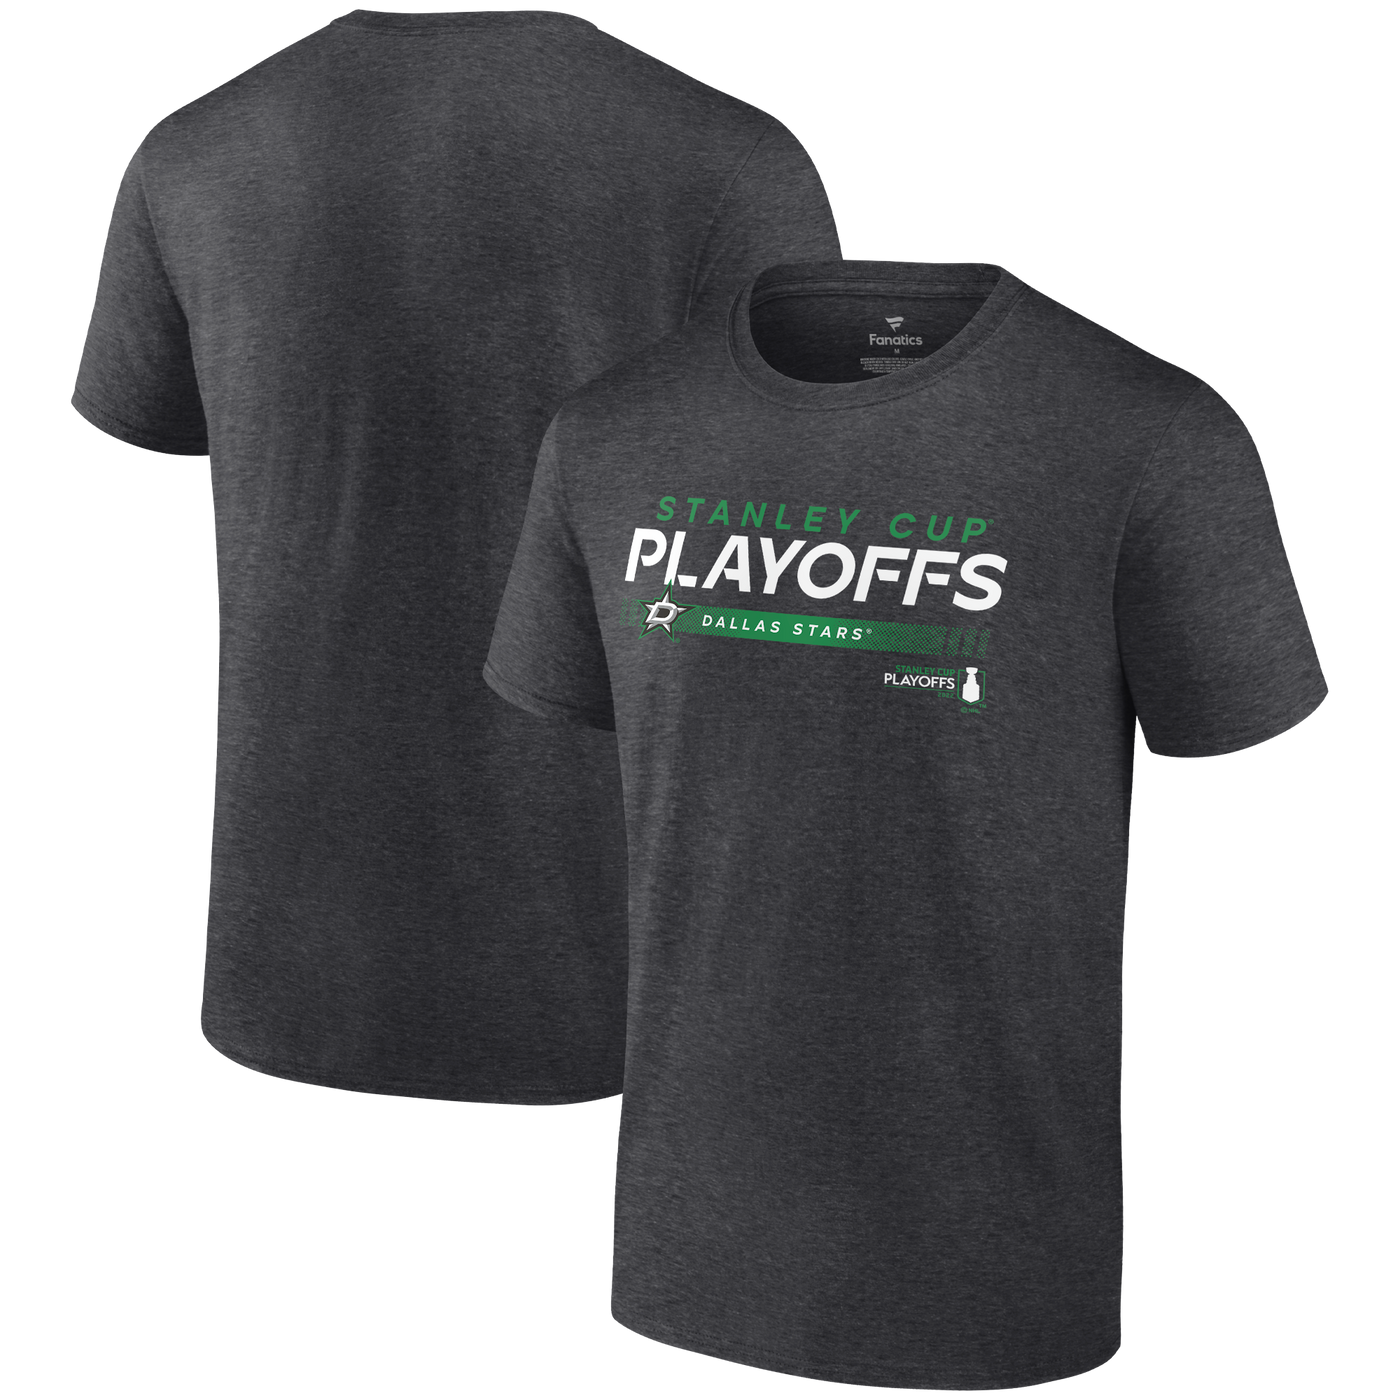 Dallas Stars Fanatics 2022 Playoffs Playmaker S/s Tshirt in Gray - Front and Back View